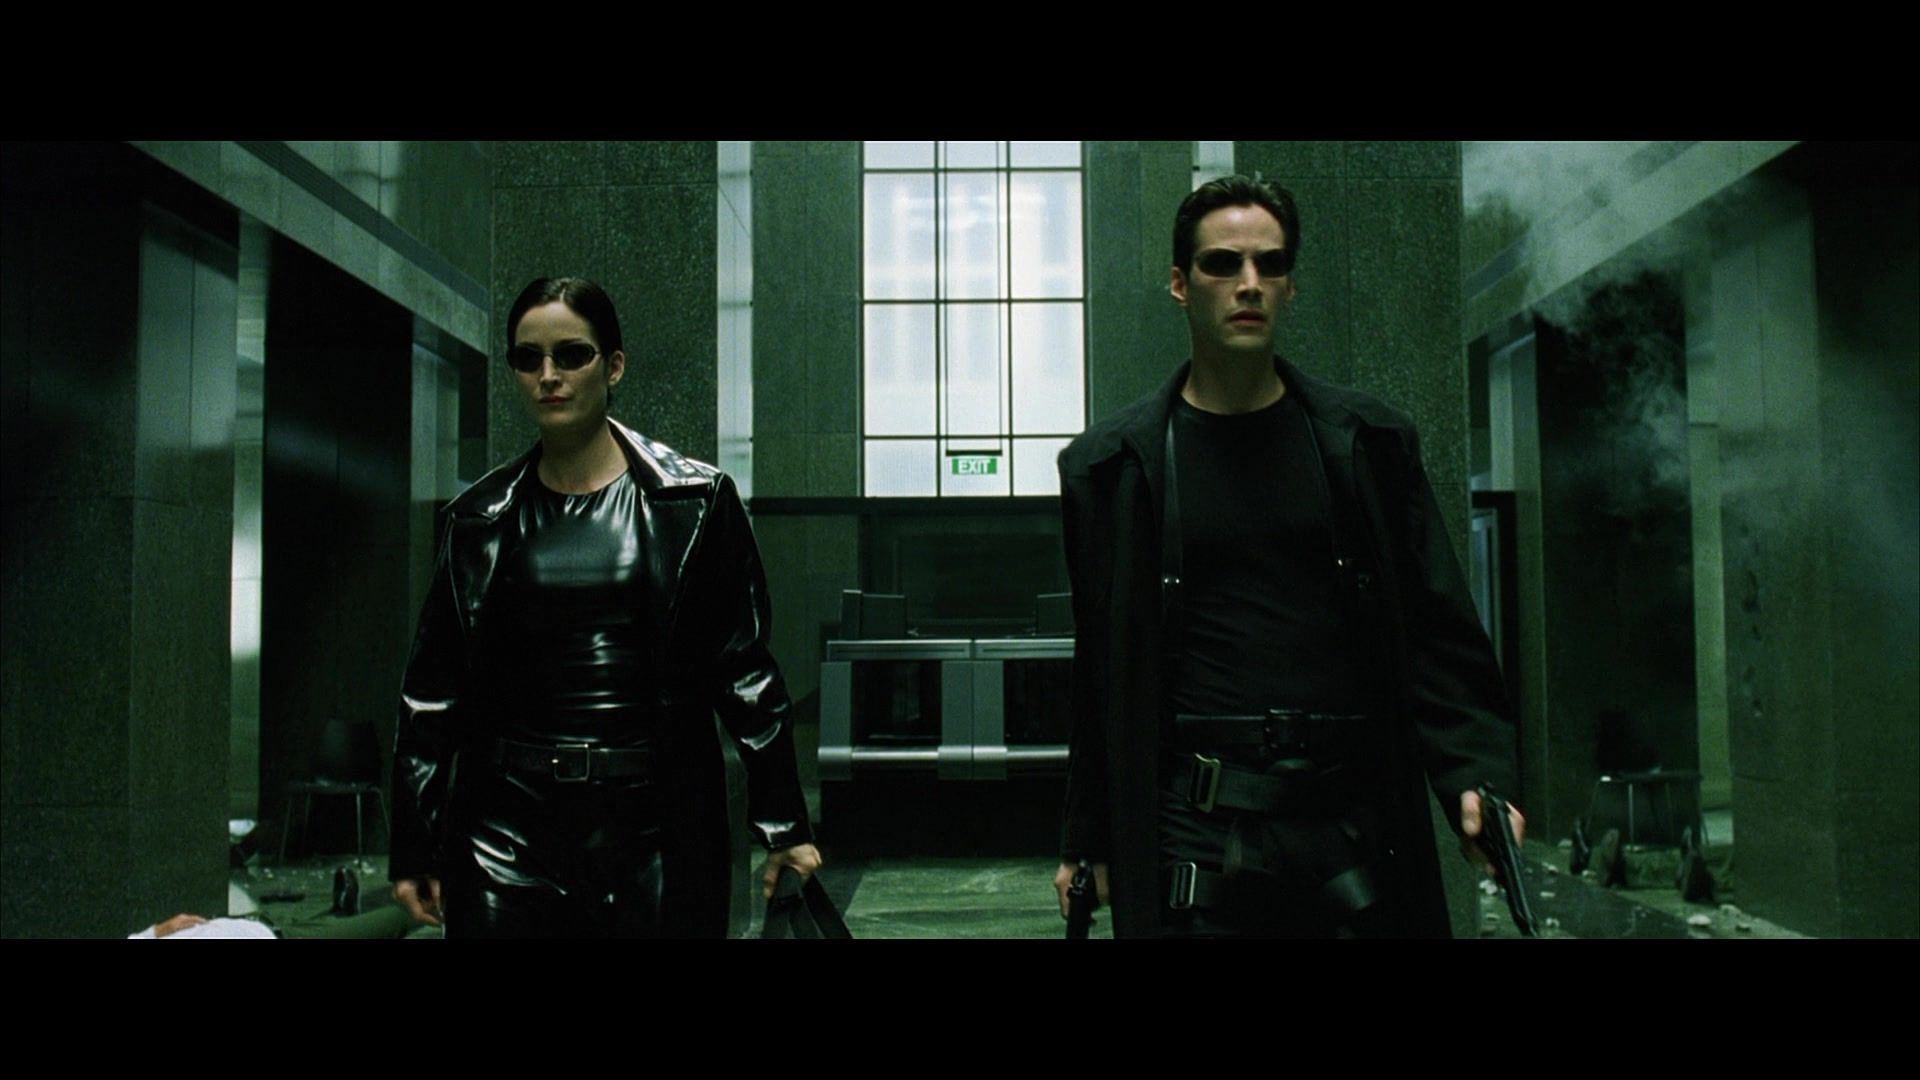 Trinity (Carrie-Anne Moss) and Neo (Keanu Reeves) walk towards the camera.